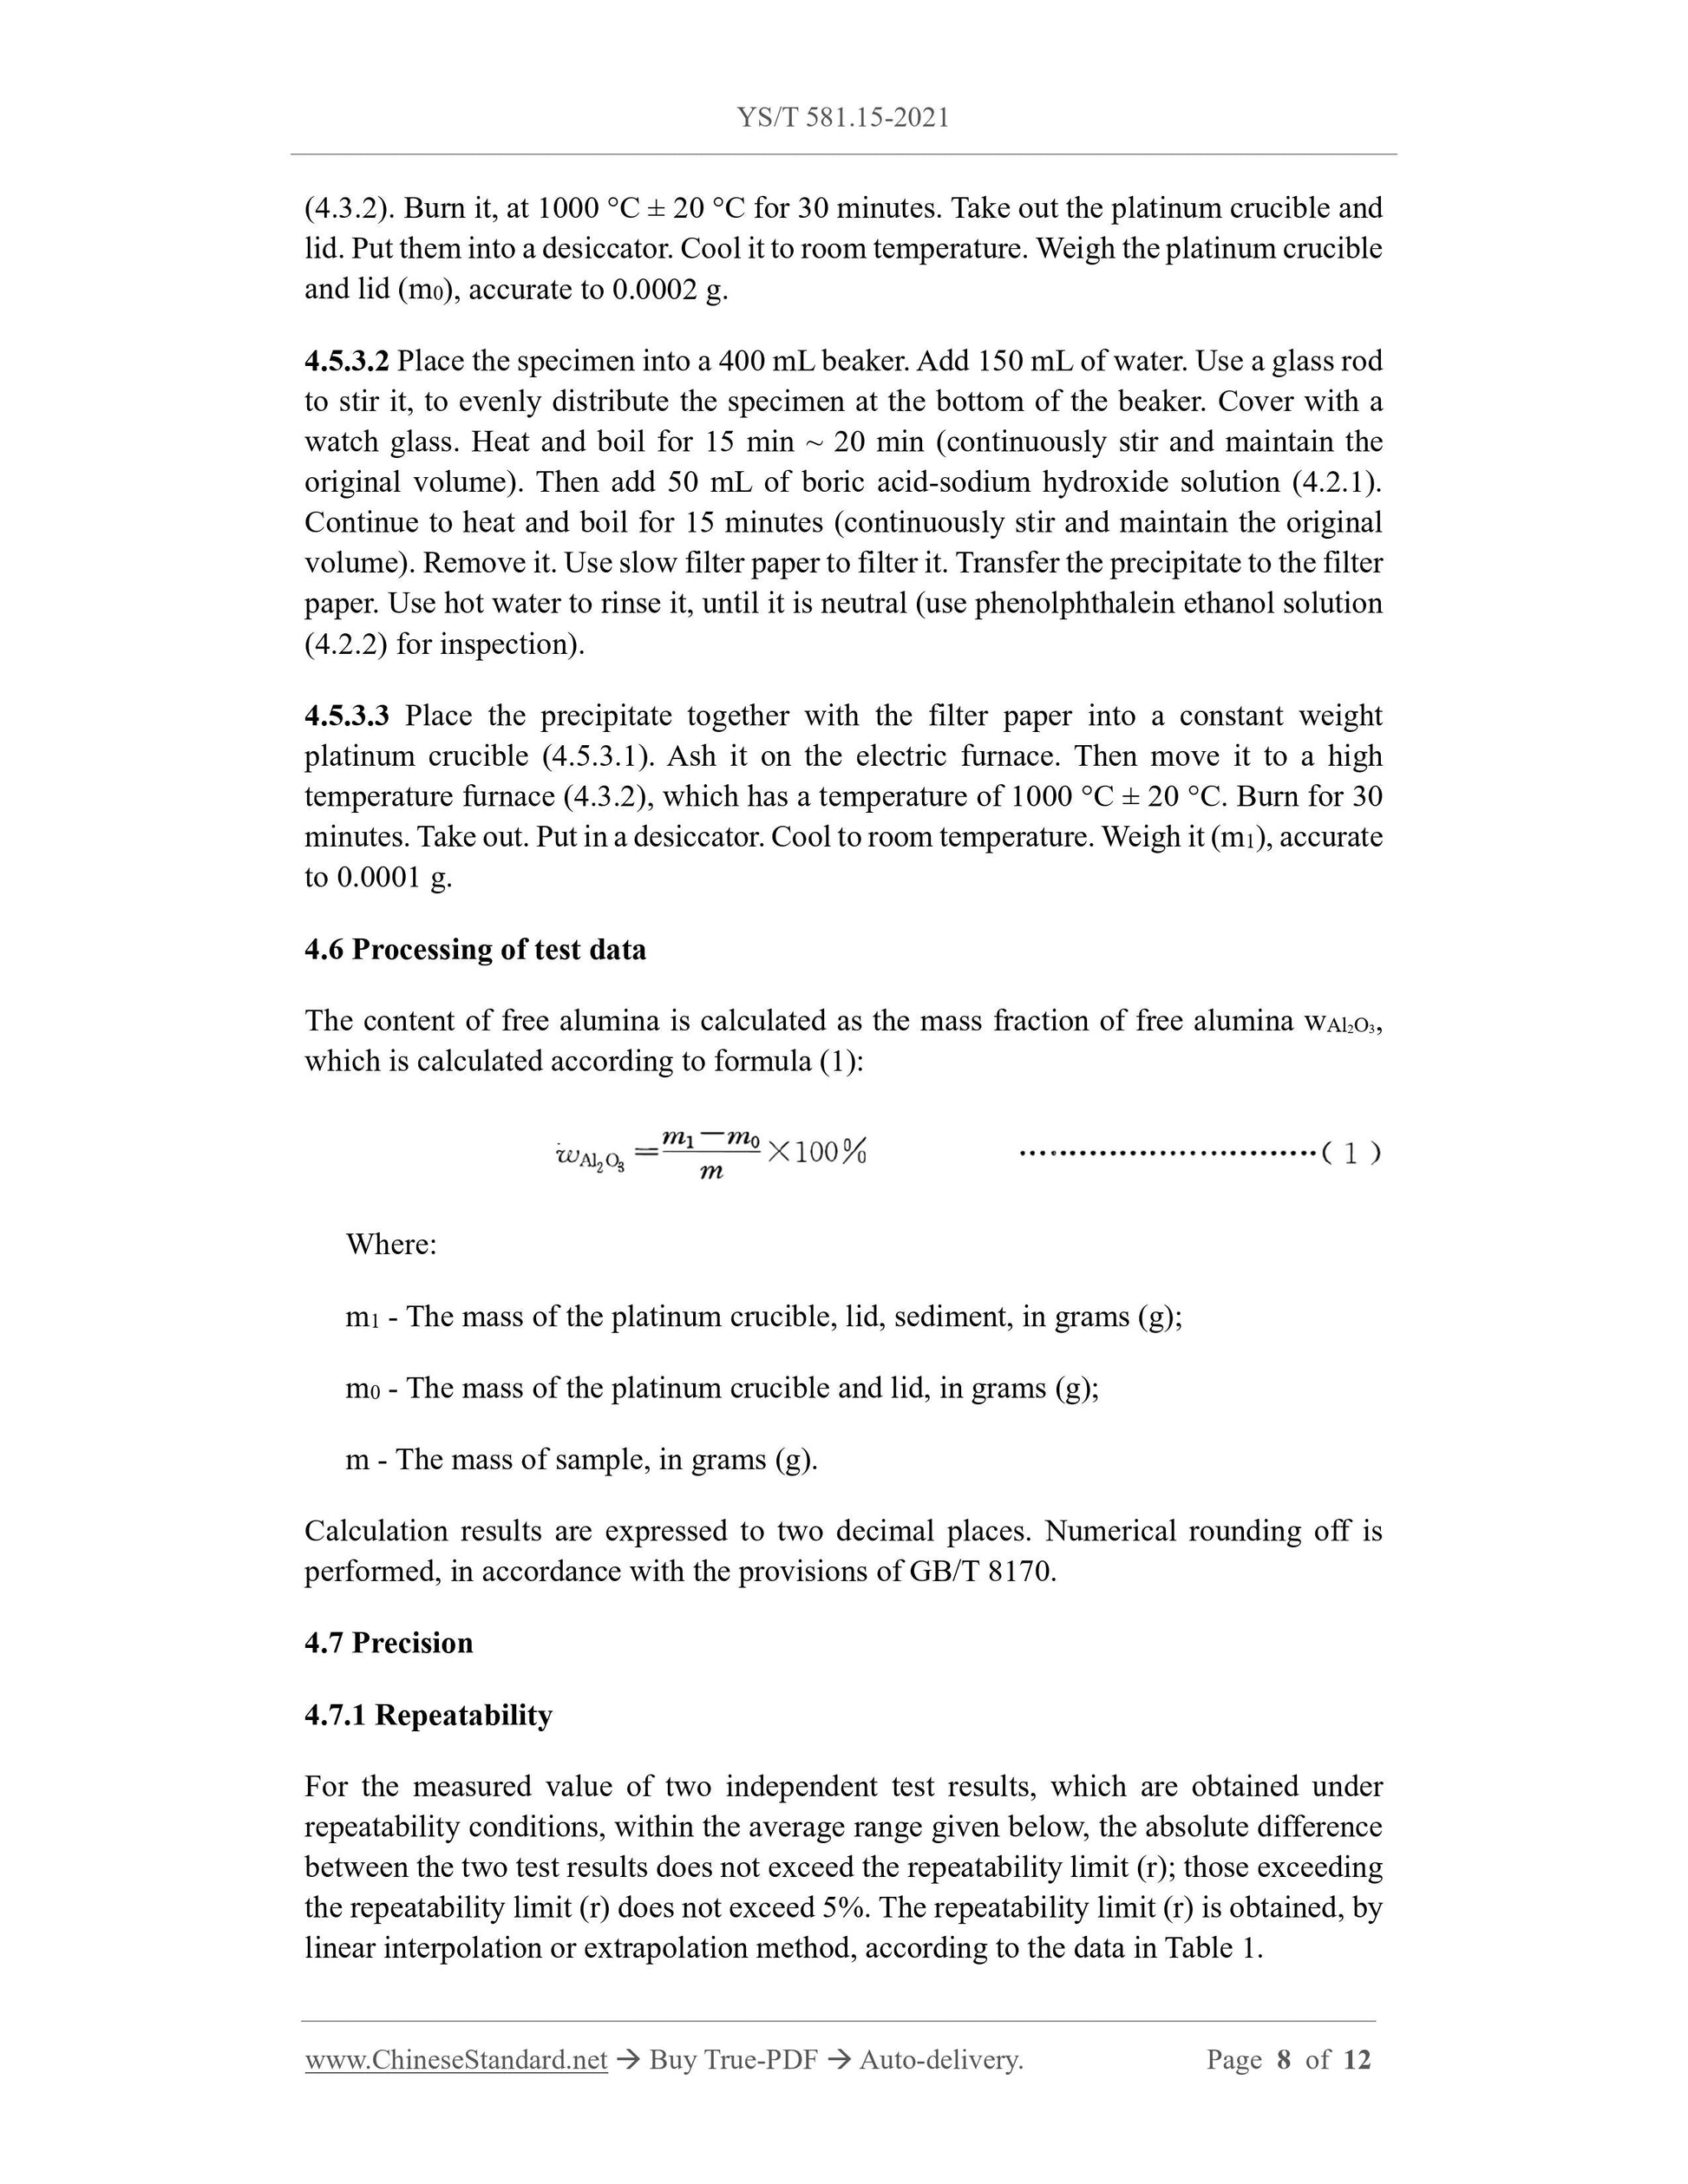 YS/T 581.15-2021 Page 5